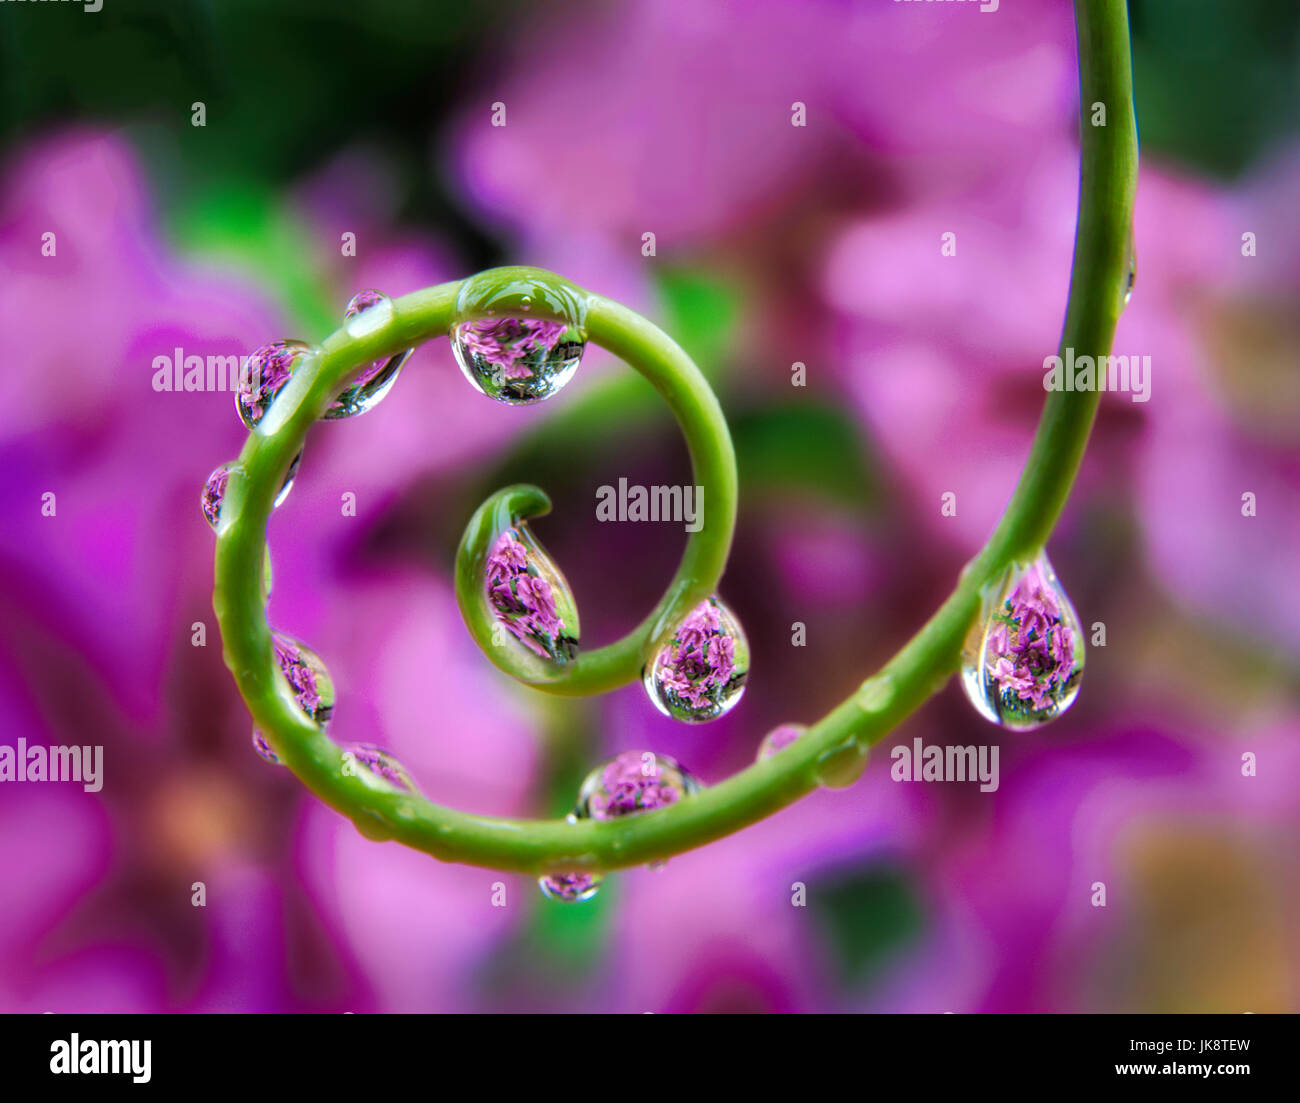 Clematis seen through beads of water on tendril of passion flower plant. Oregon Stock Photo